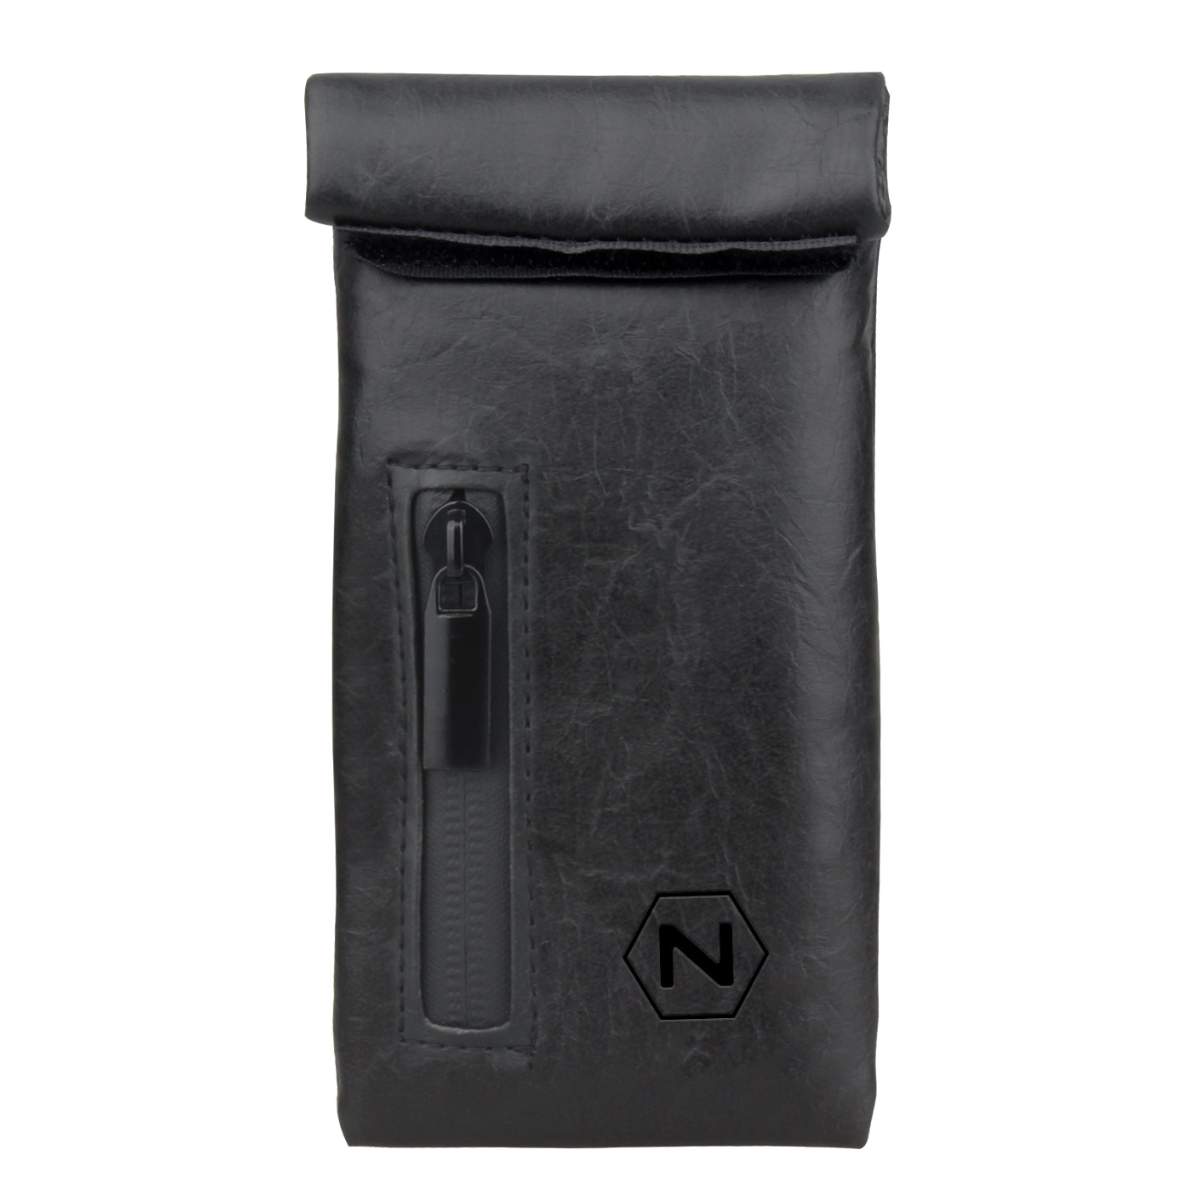 Nectar Smell Proof Vape Pouch